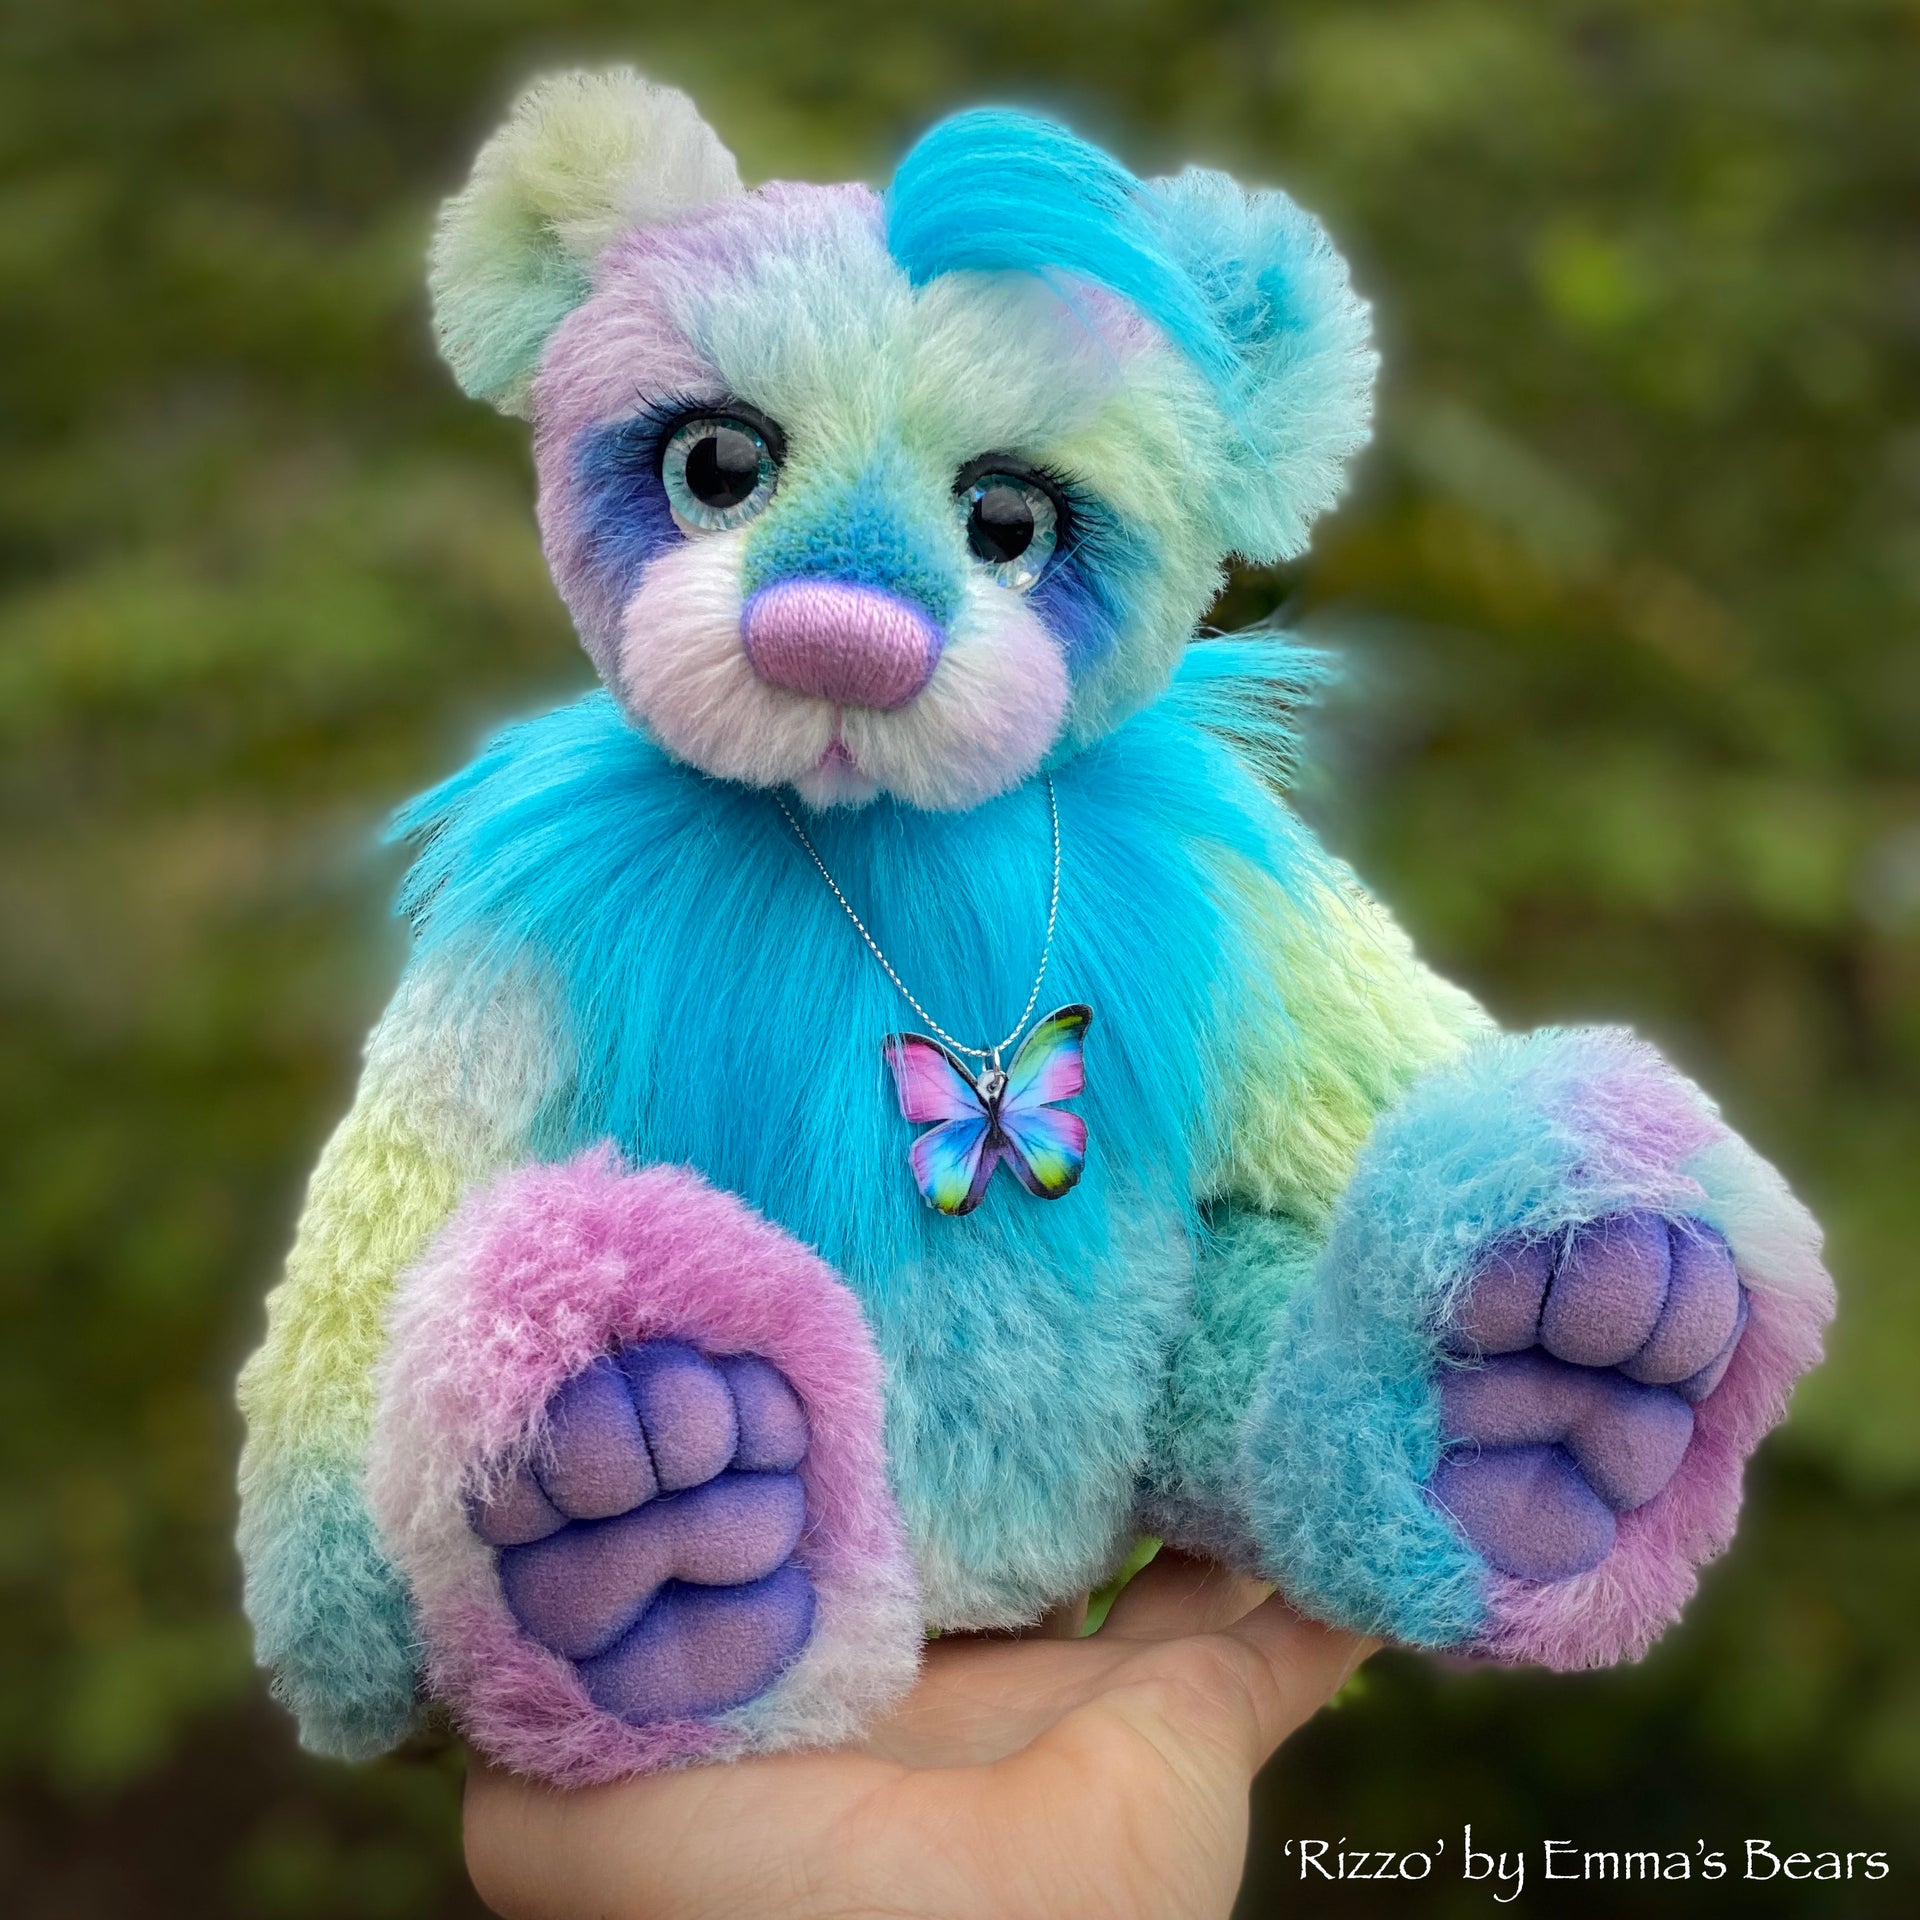 Rizzo - 12" Hand-Dyed Alpaca and faux fur artist bear by Emma's Bears - OOAK